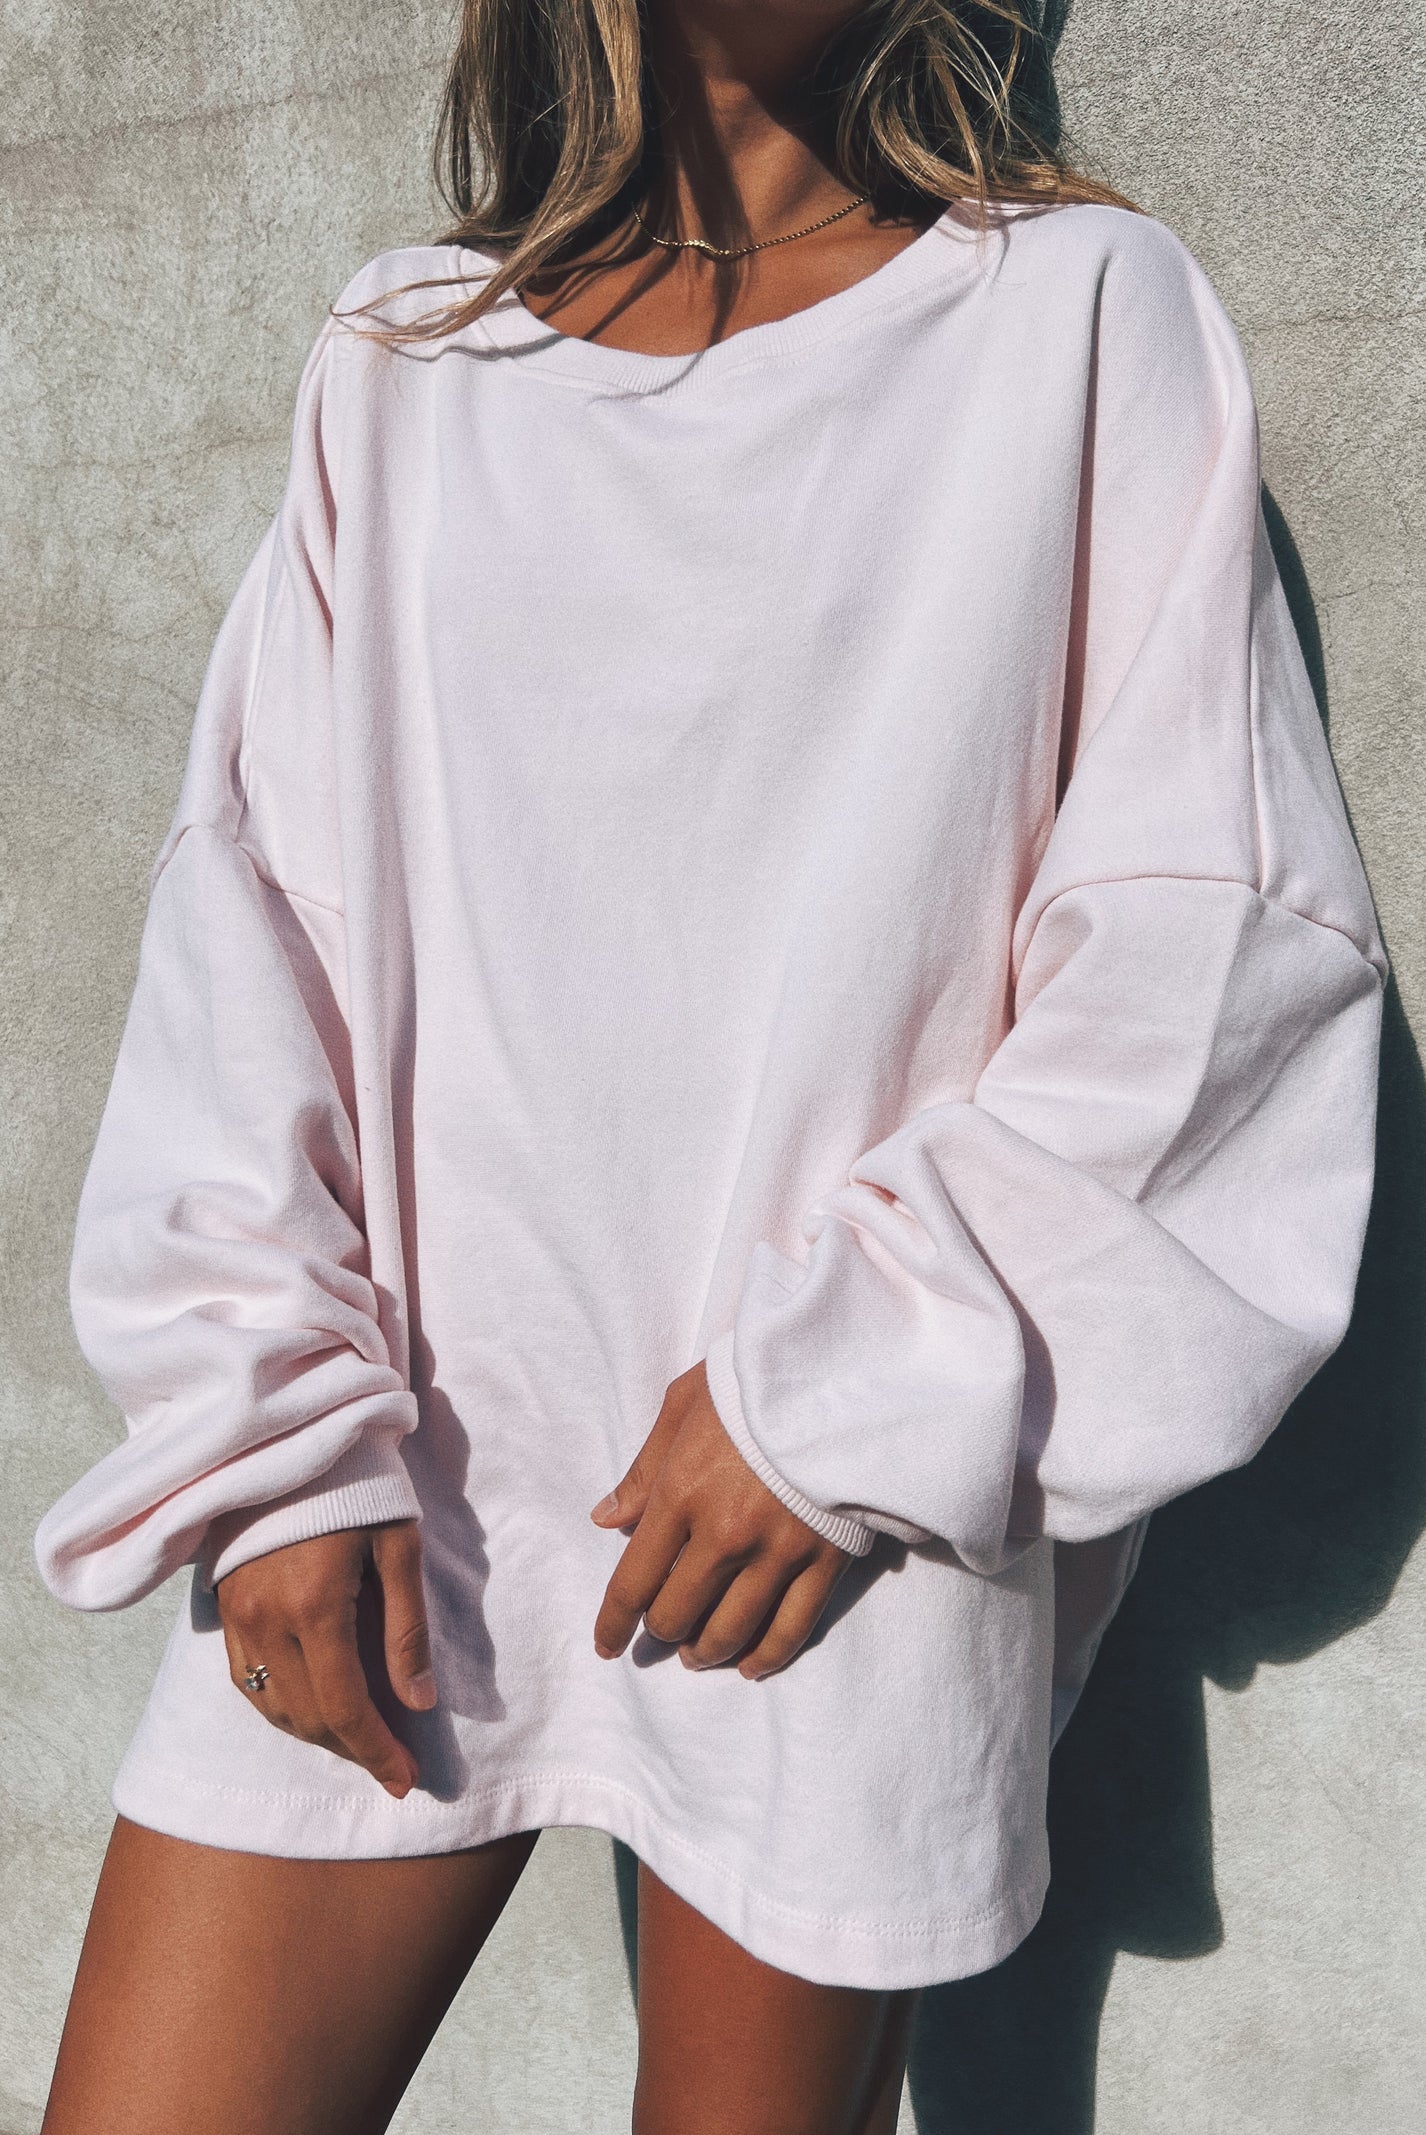 LANEWAY THE LABEL Oversized Jumper in Pale Pink